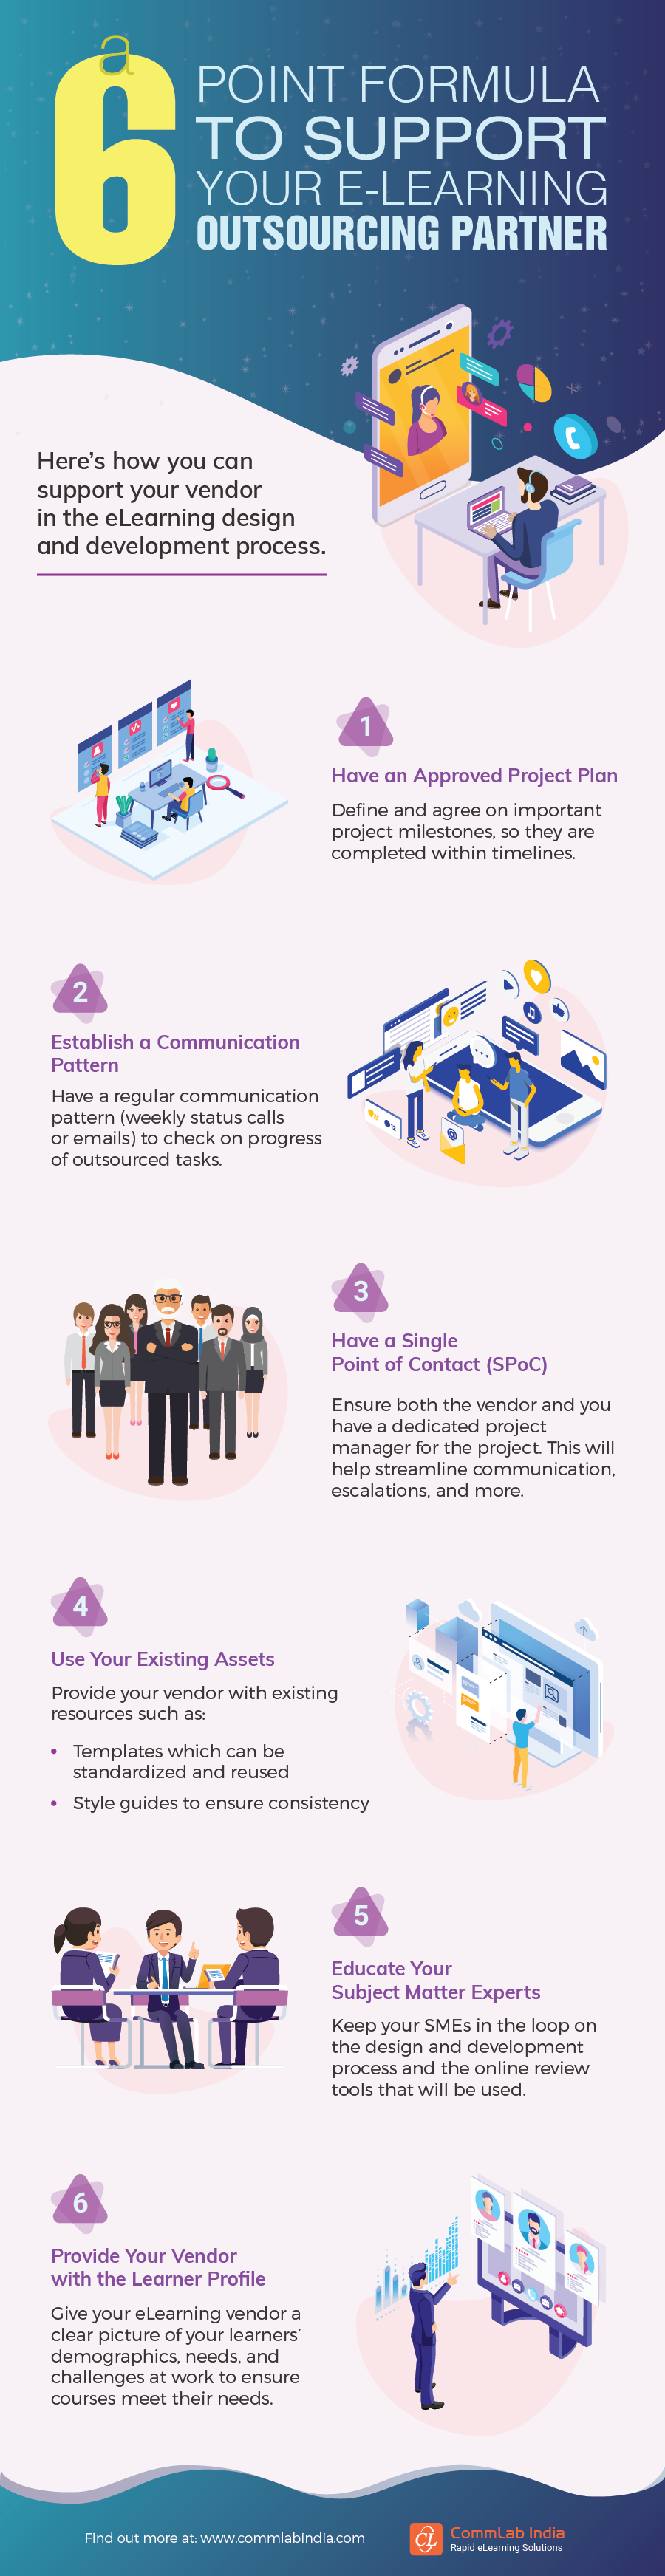 A 6-Point Formula to Support Your eLearning Outsourcing Partner [Infographic]